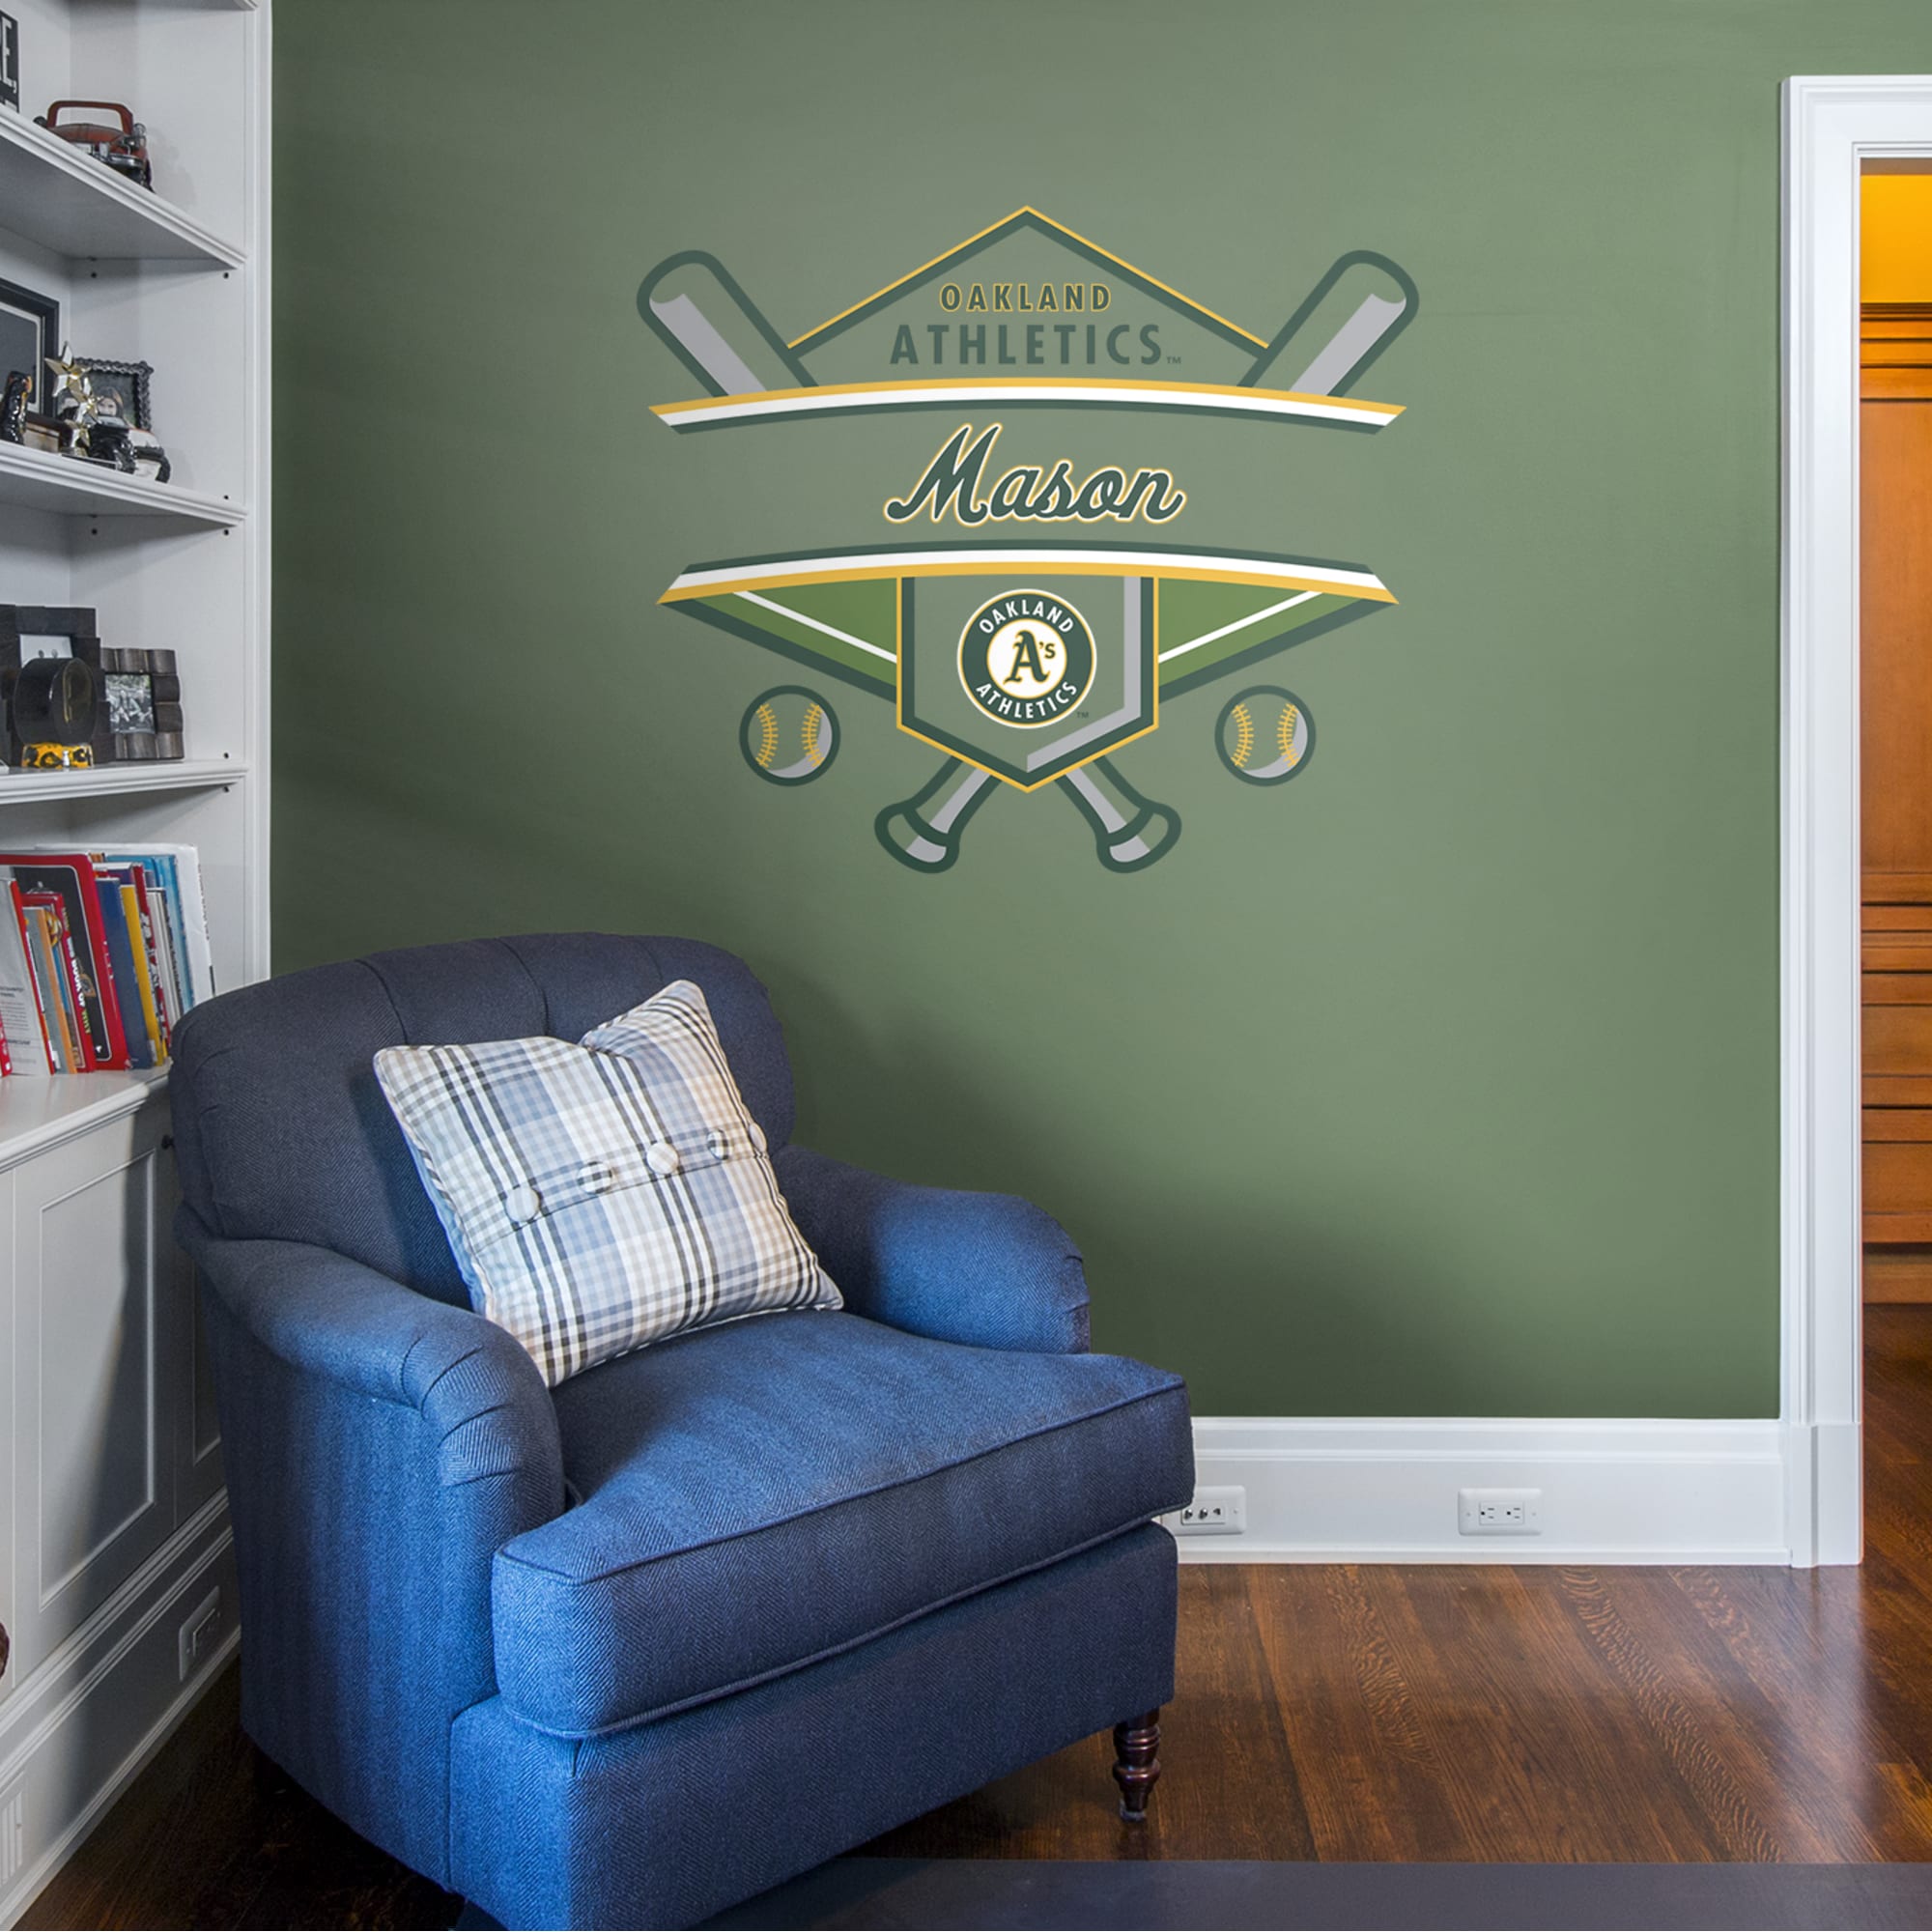 Oakland Athletics: Personalized Name - Officially Licensed MLB Transfer Decal 45.0"W x 39.0"H by Fathead | Vinyl